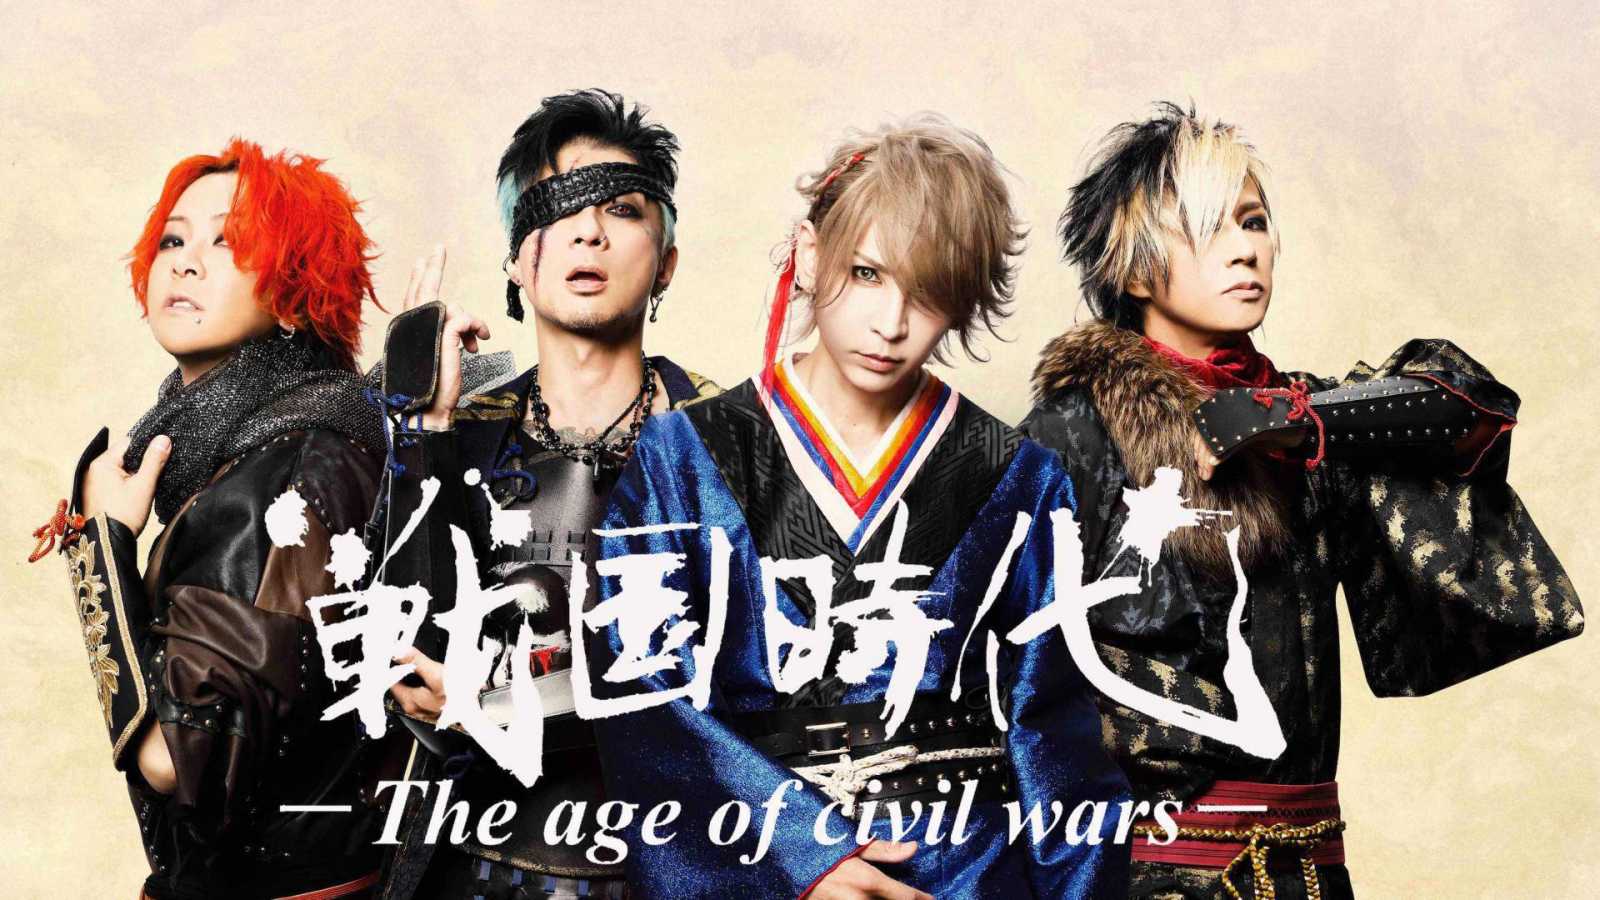 Sengoku jidai -The age of civil wars-  Announce Live Stream Concert © Sengoku jidai -The age of civil wars-. All rights reserved.